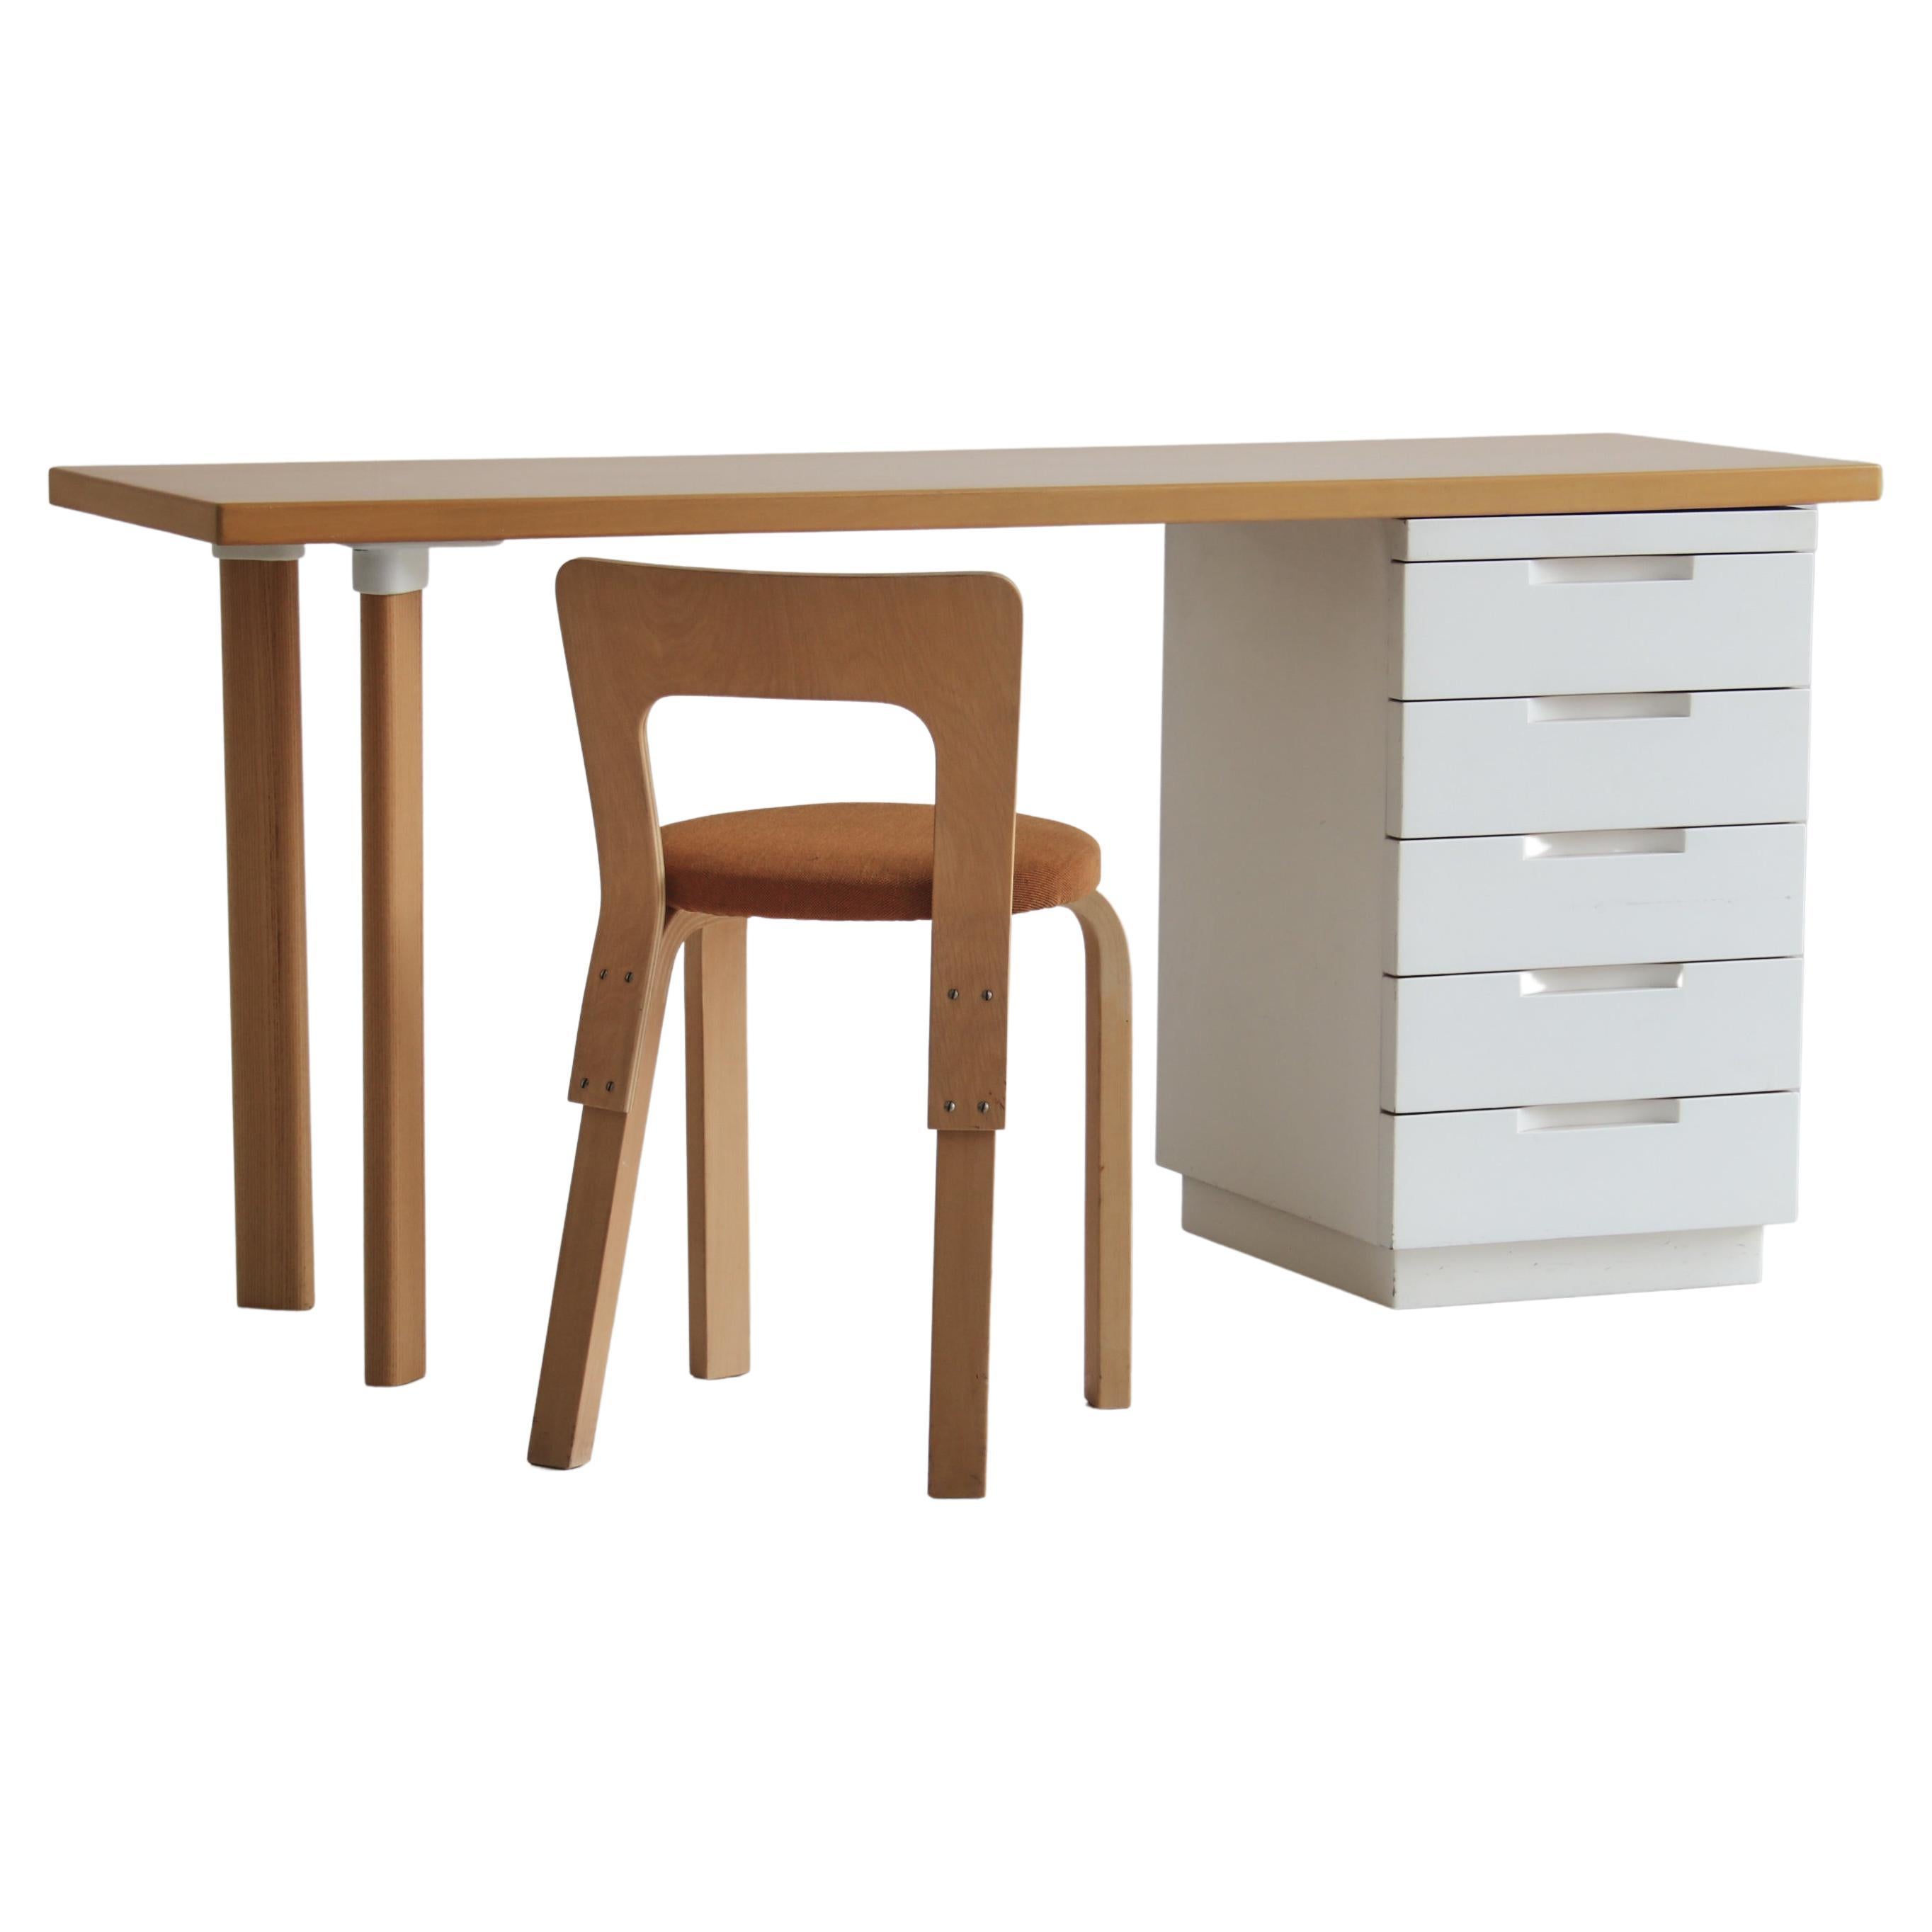 Alvar Aalto Desk and Chair Model 65, made by Artek, Finland in the 1960s